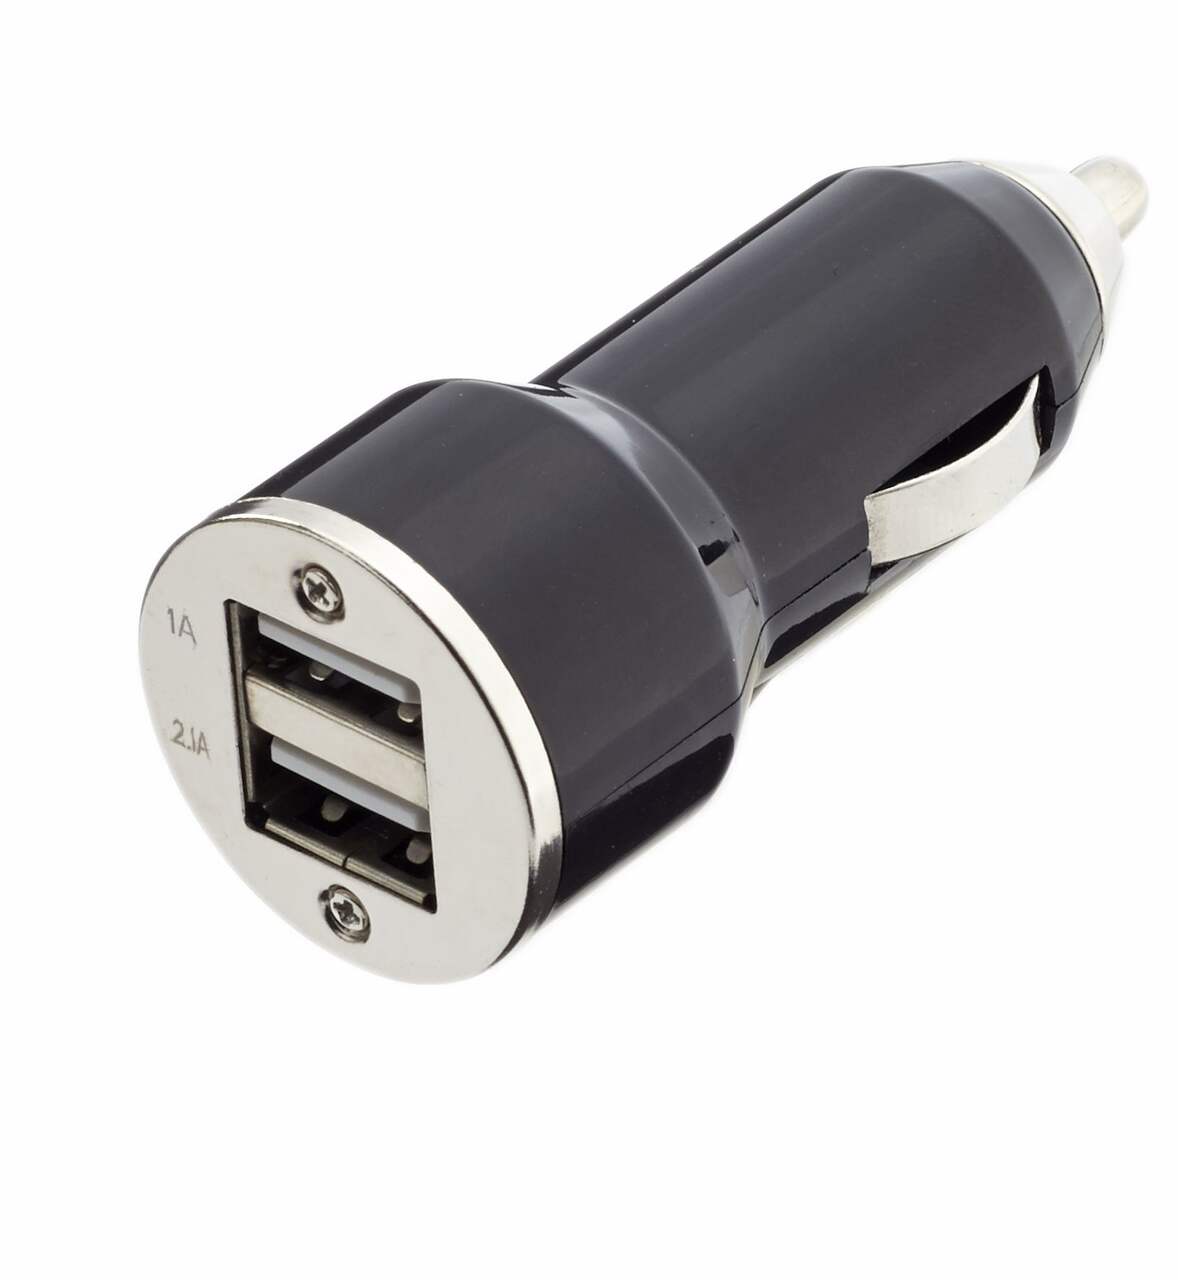 12V Dual USB Car Charger for iPhones, Android Smartphones & Tablets